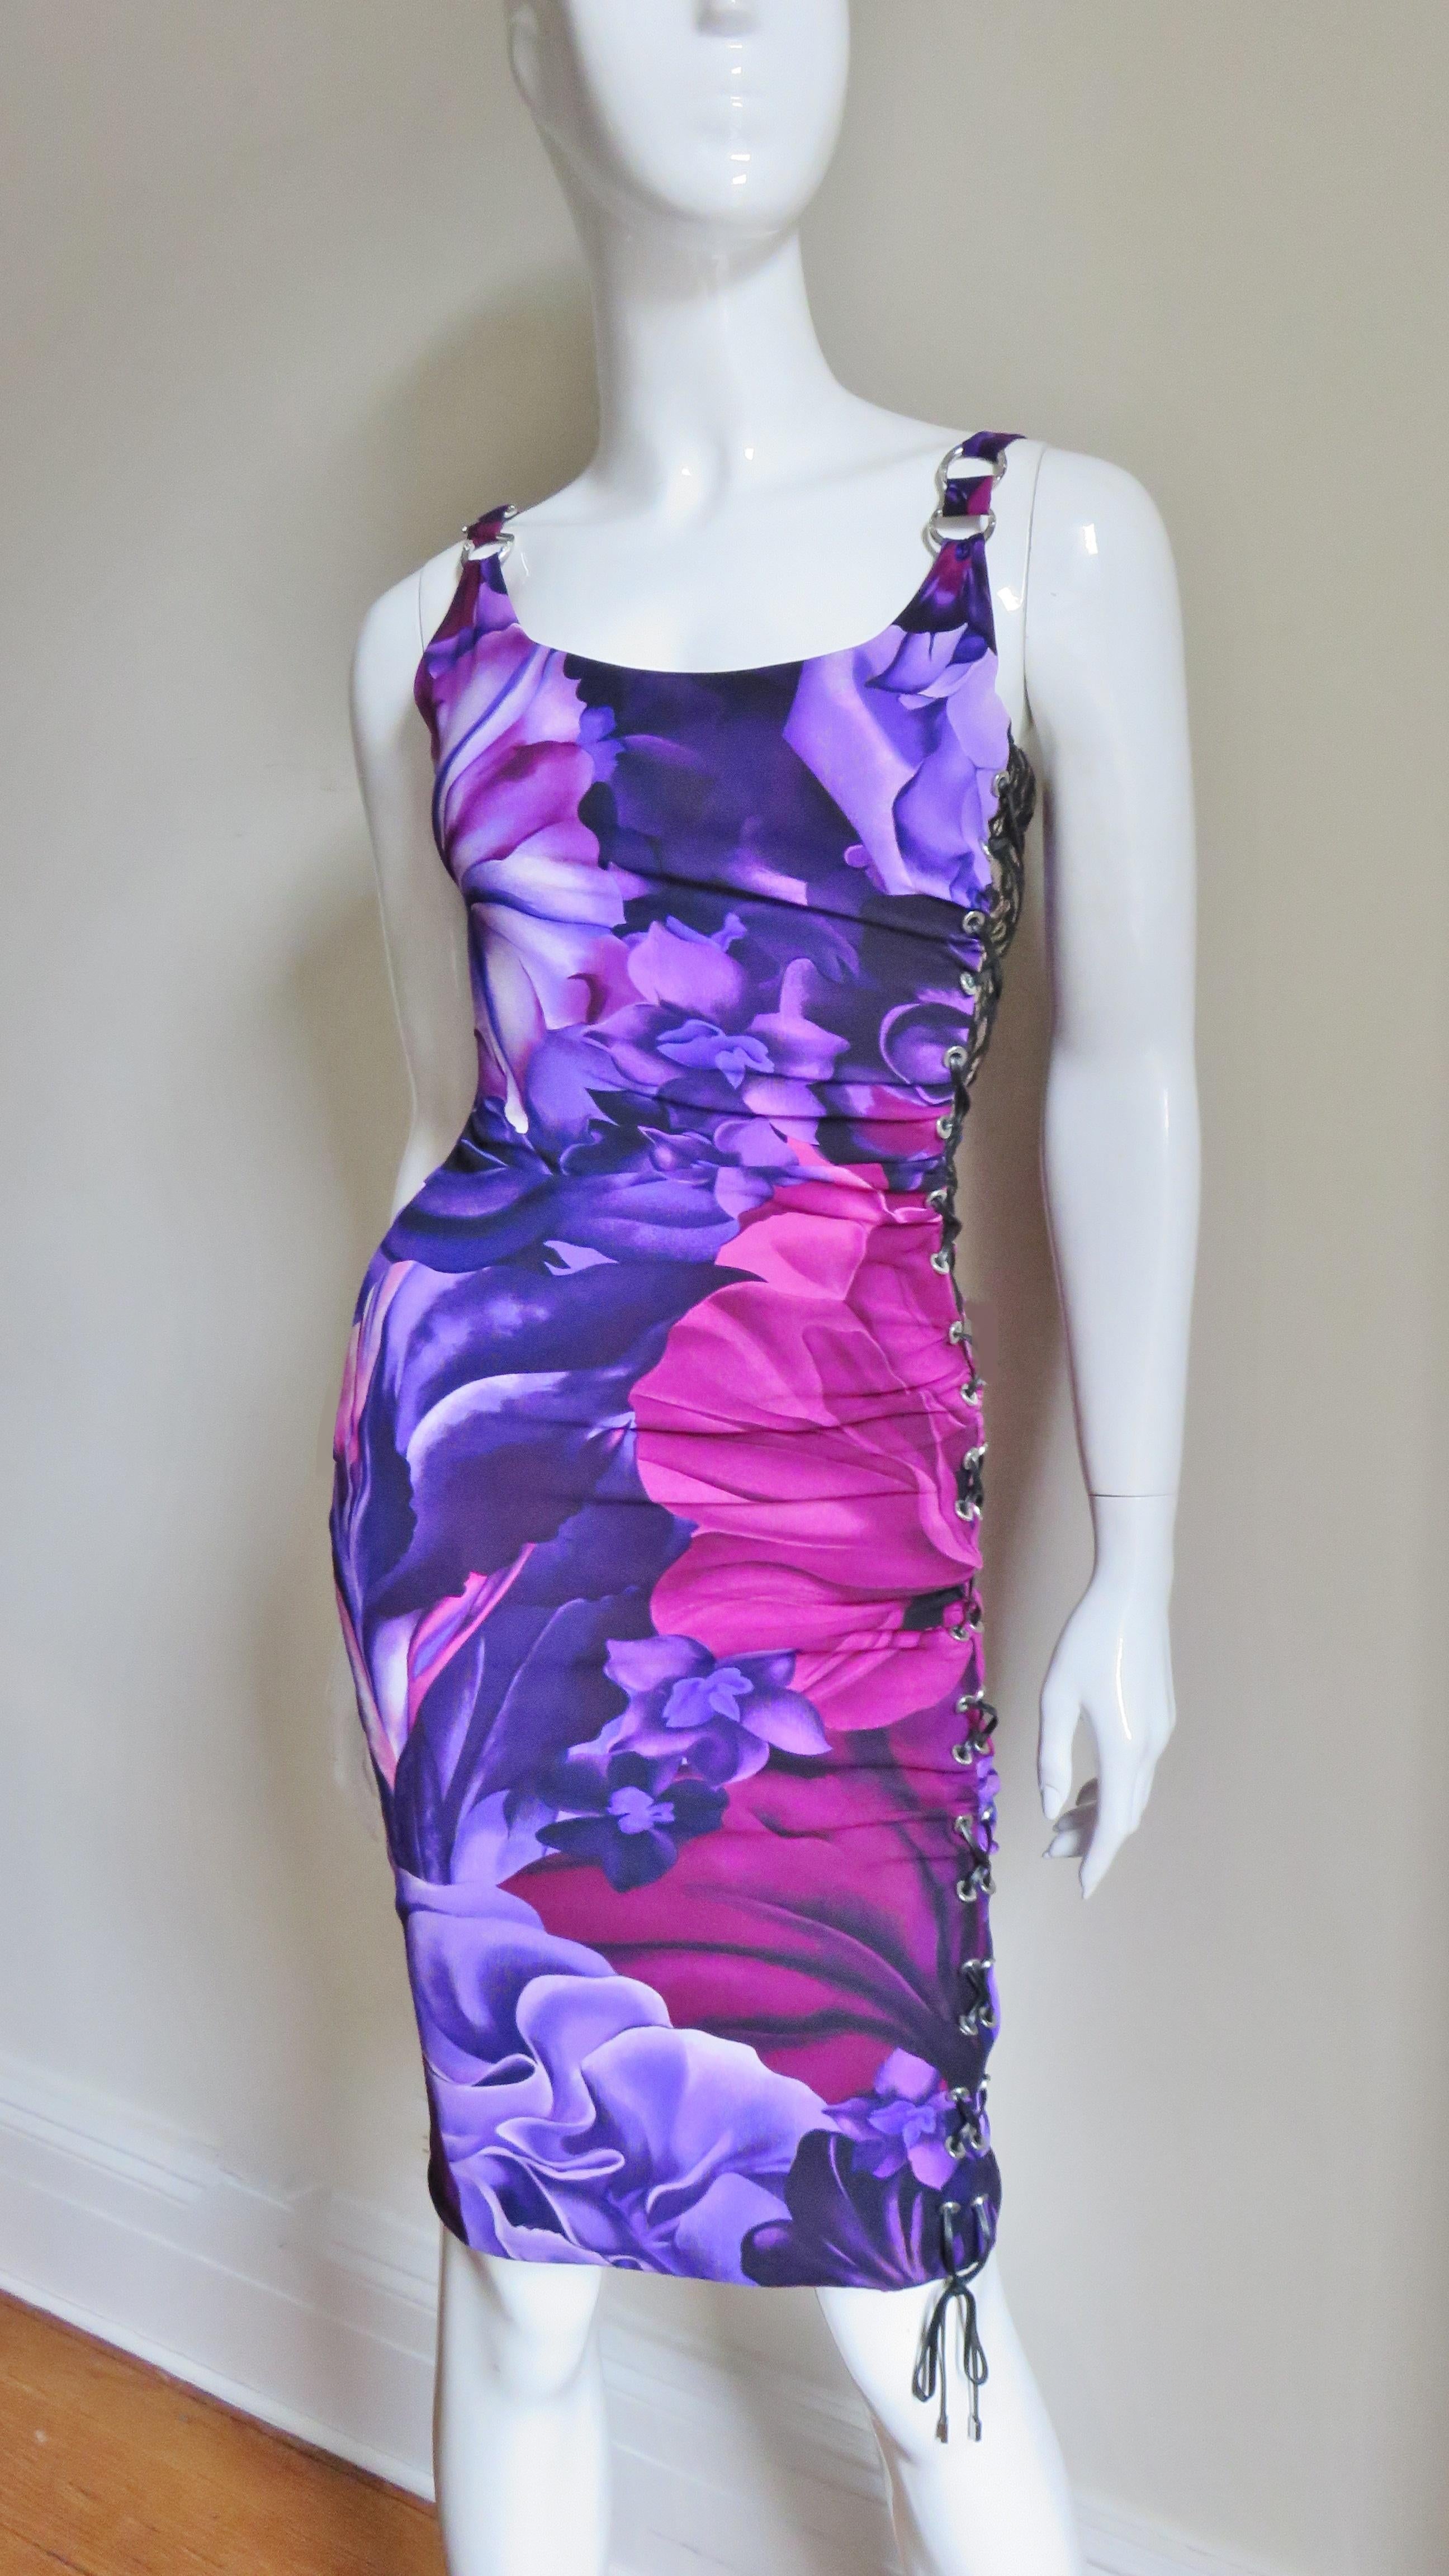 A great flower pattern stretch silk dress in pinks, purples and black from Versace. It has a scoop neckline with metal ring decorated shoulder straps. It is semi fitted with ruching across the dress front and back. The left side laces up with fine